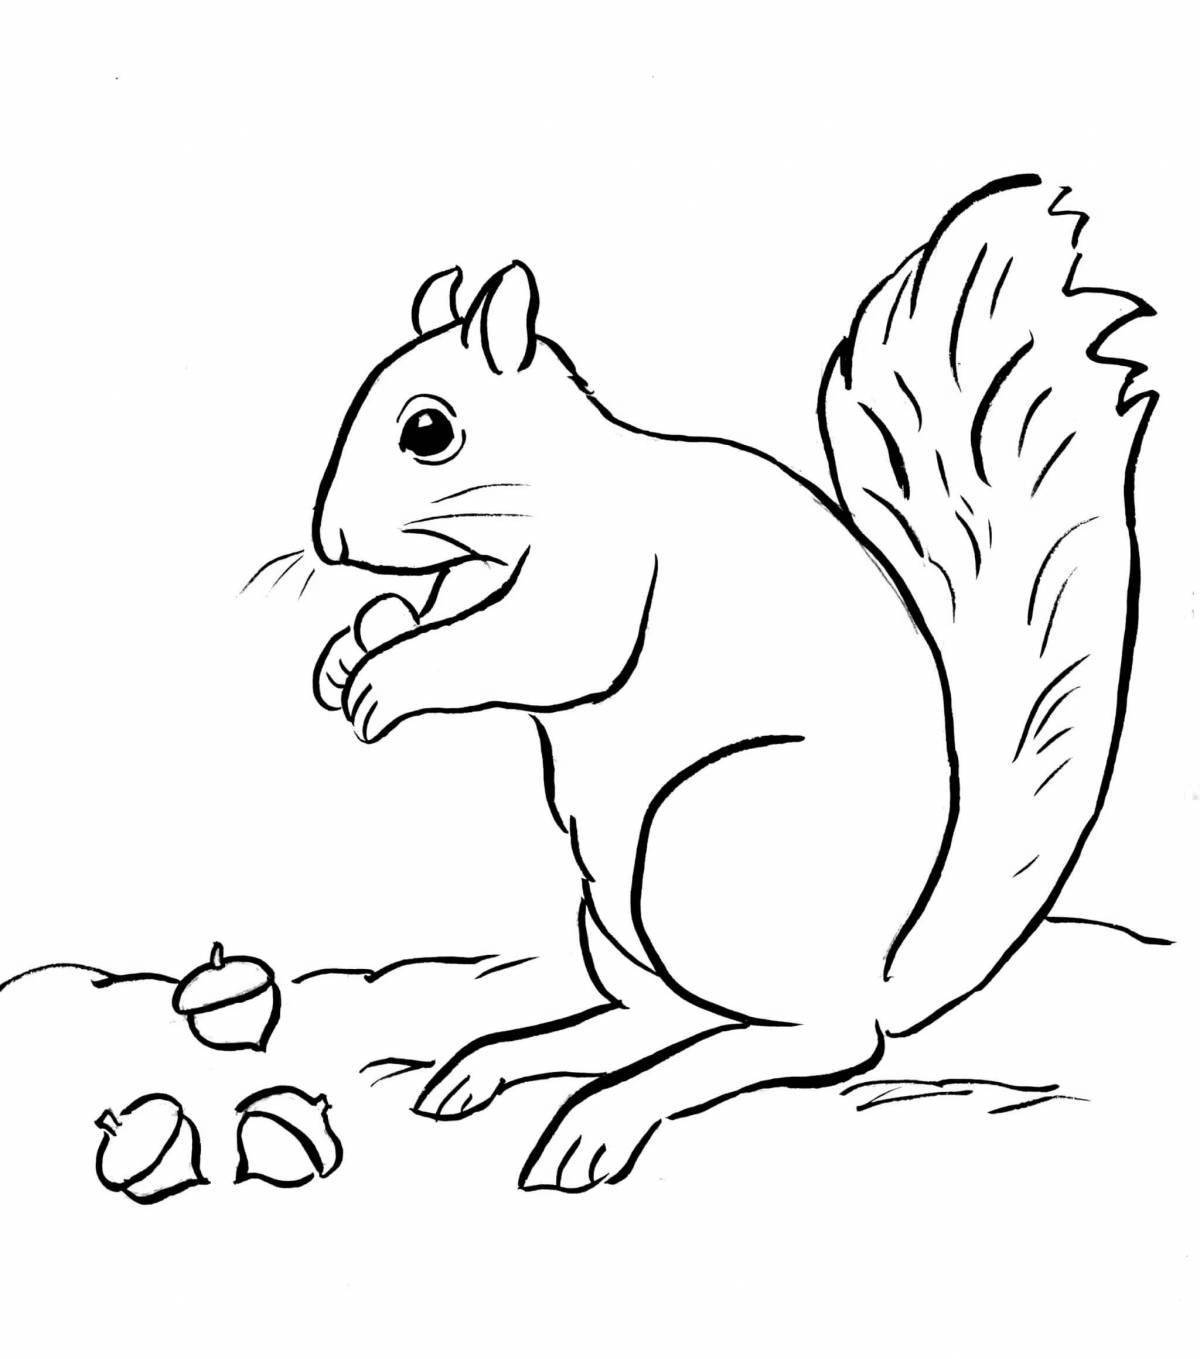 Delightful squirrel coloring with nuts